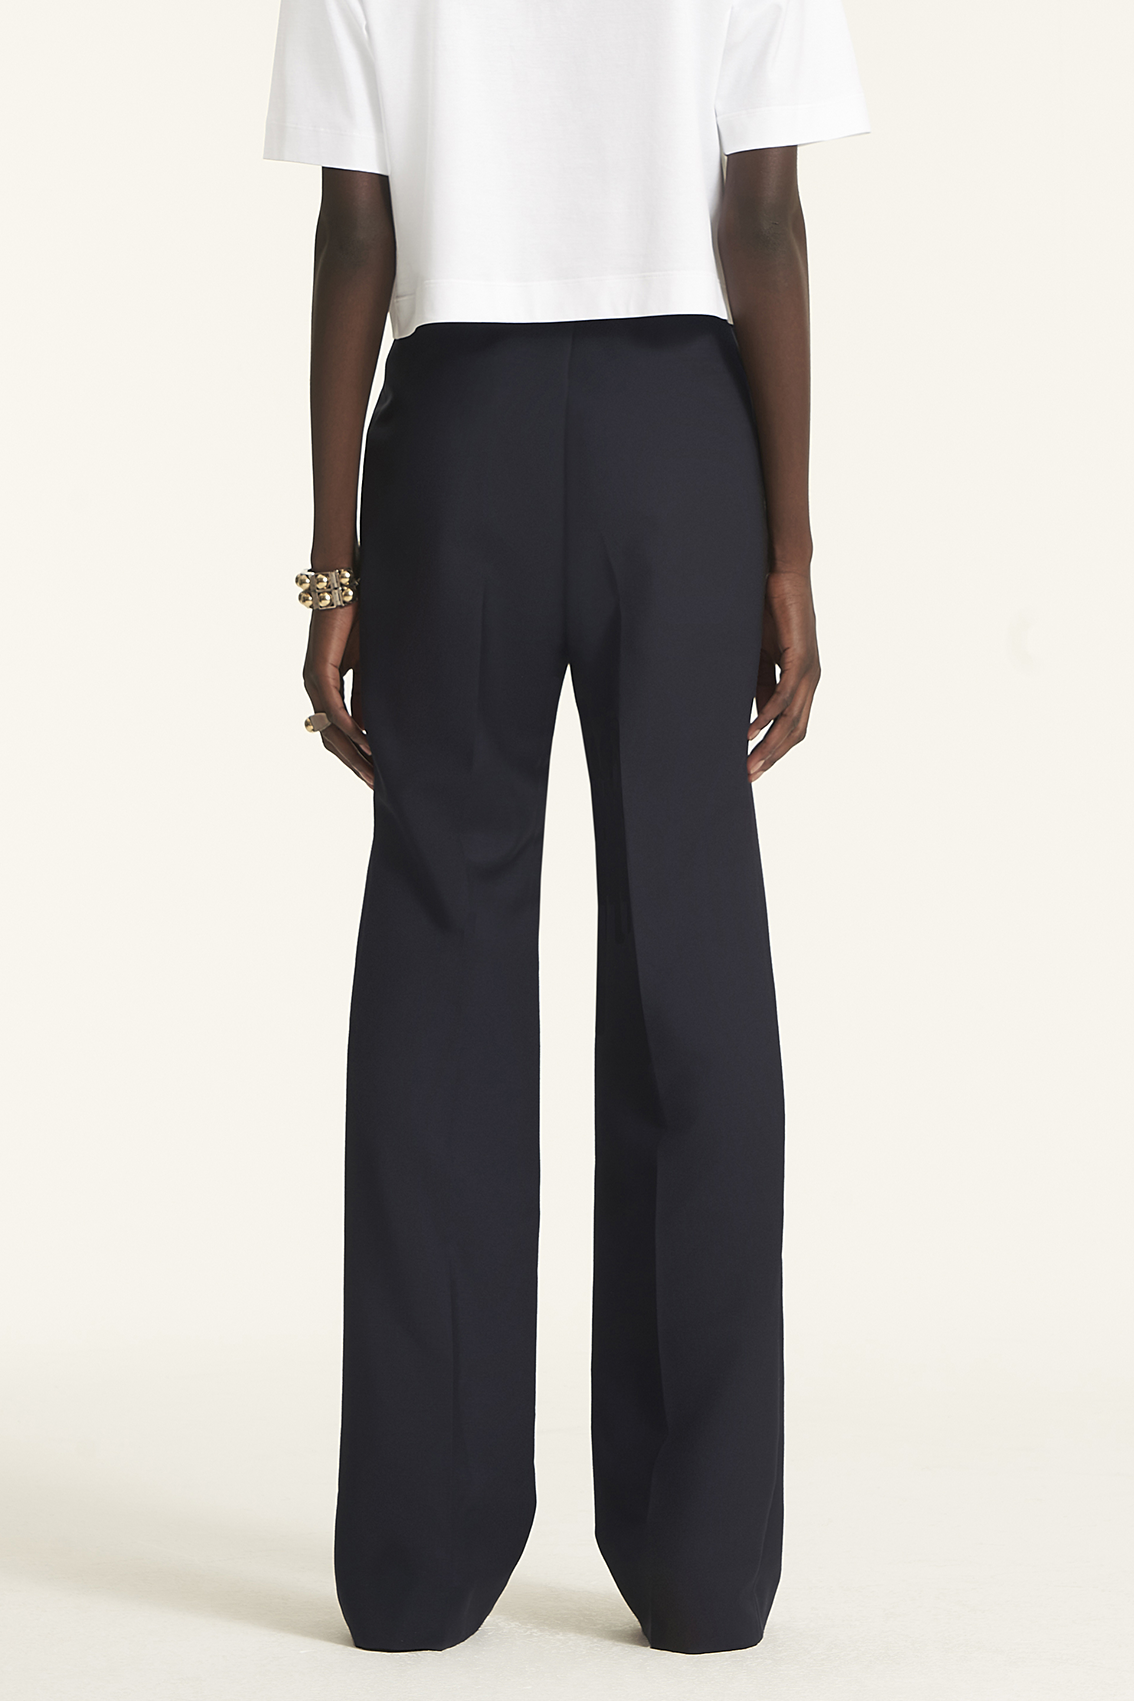 Front Seam Lengthening Trousers